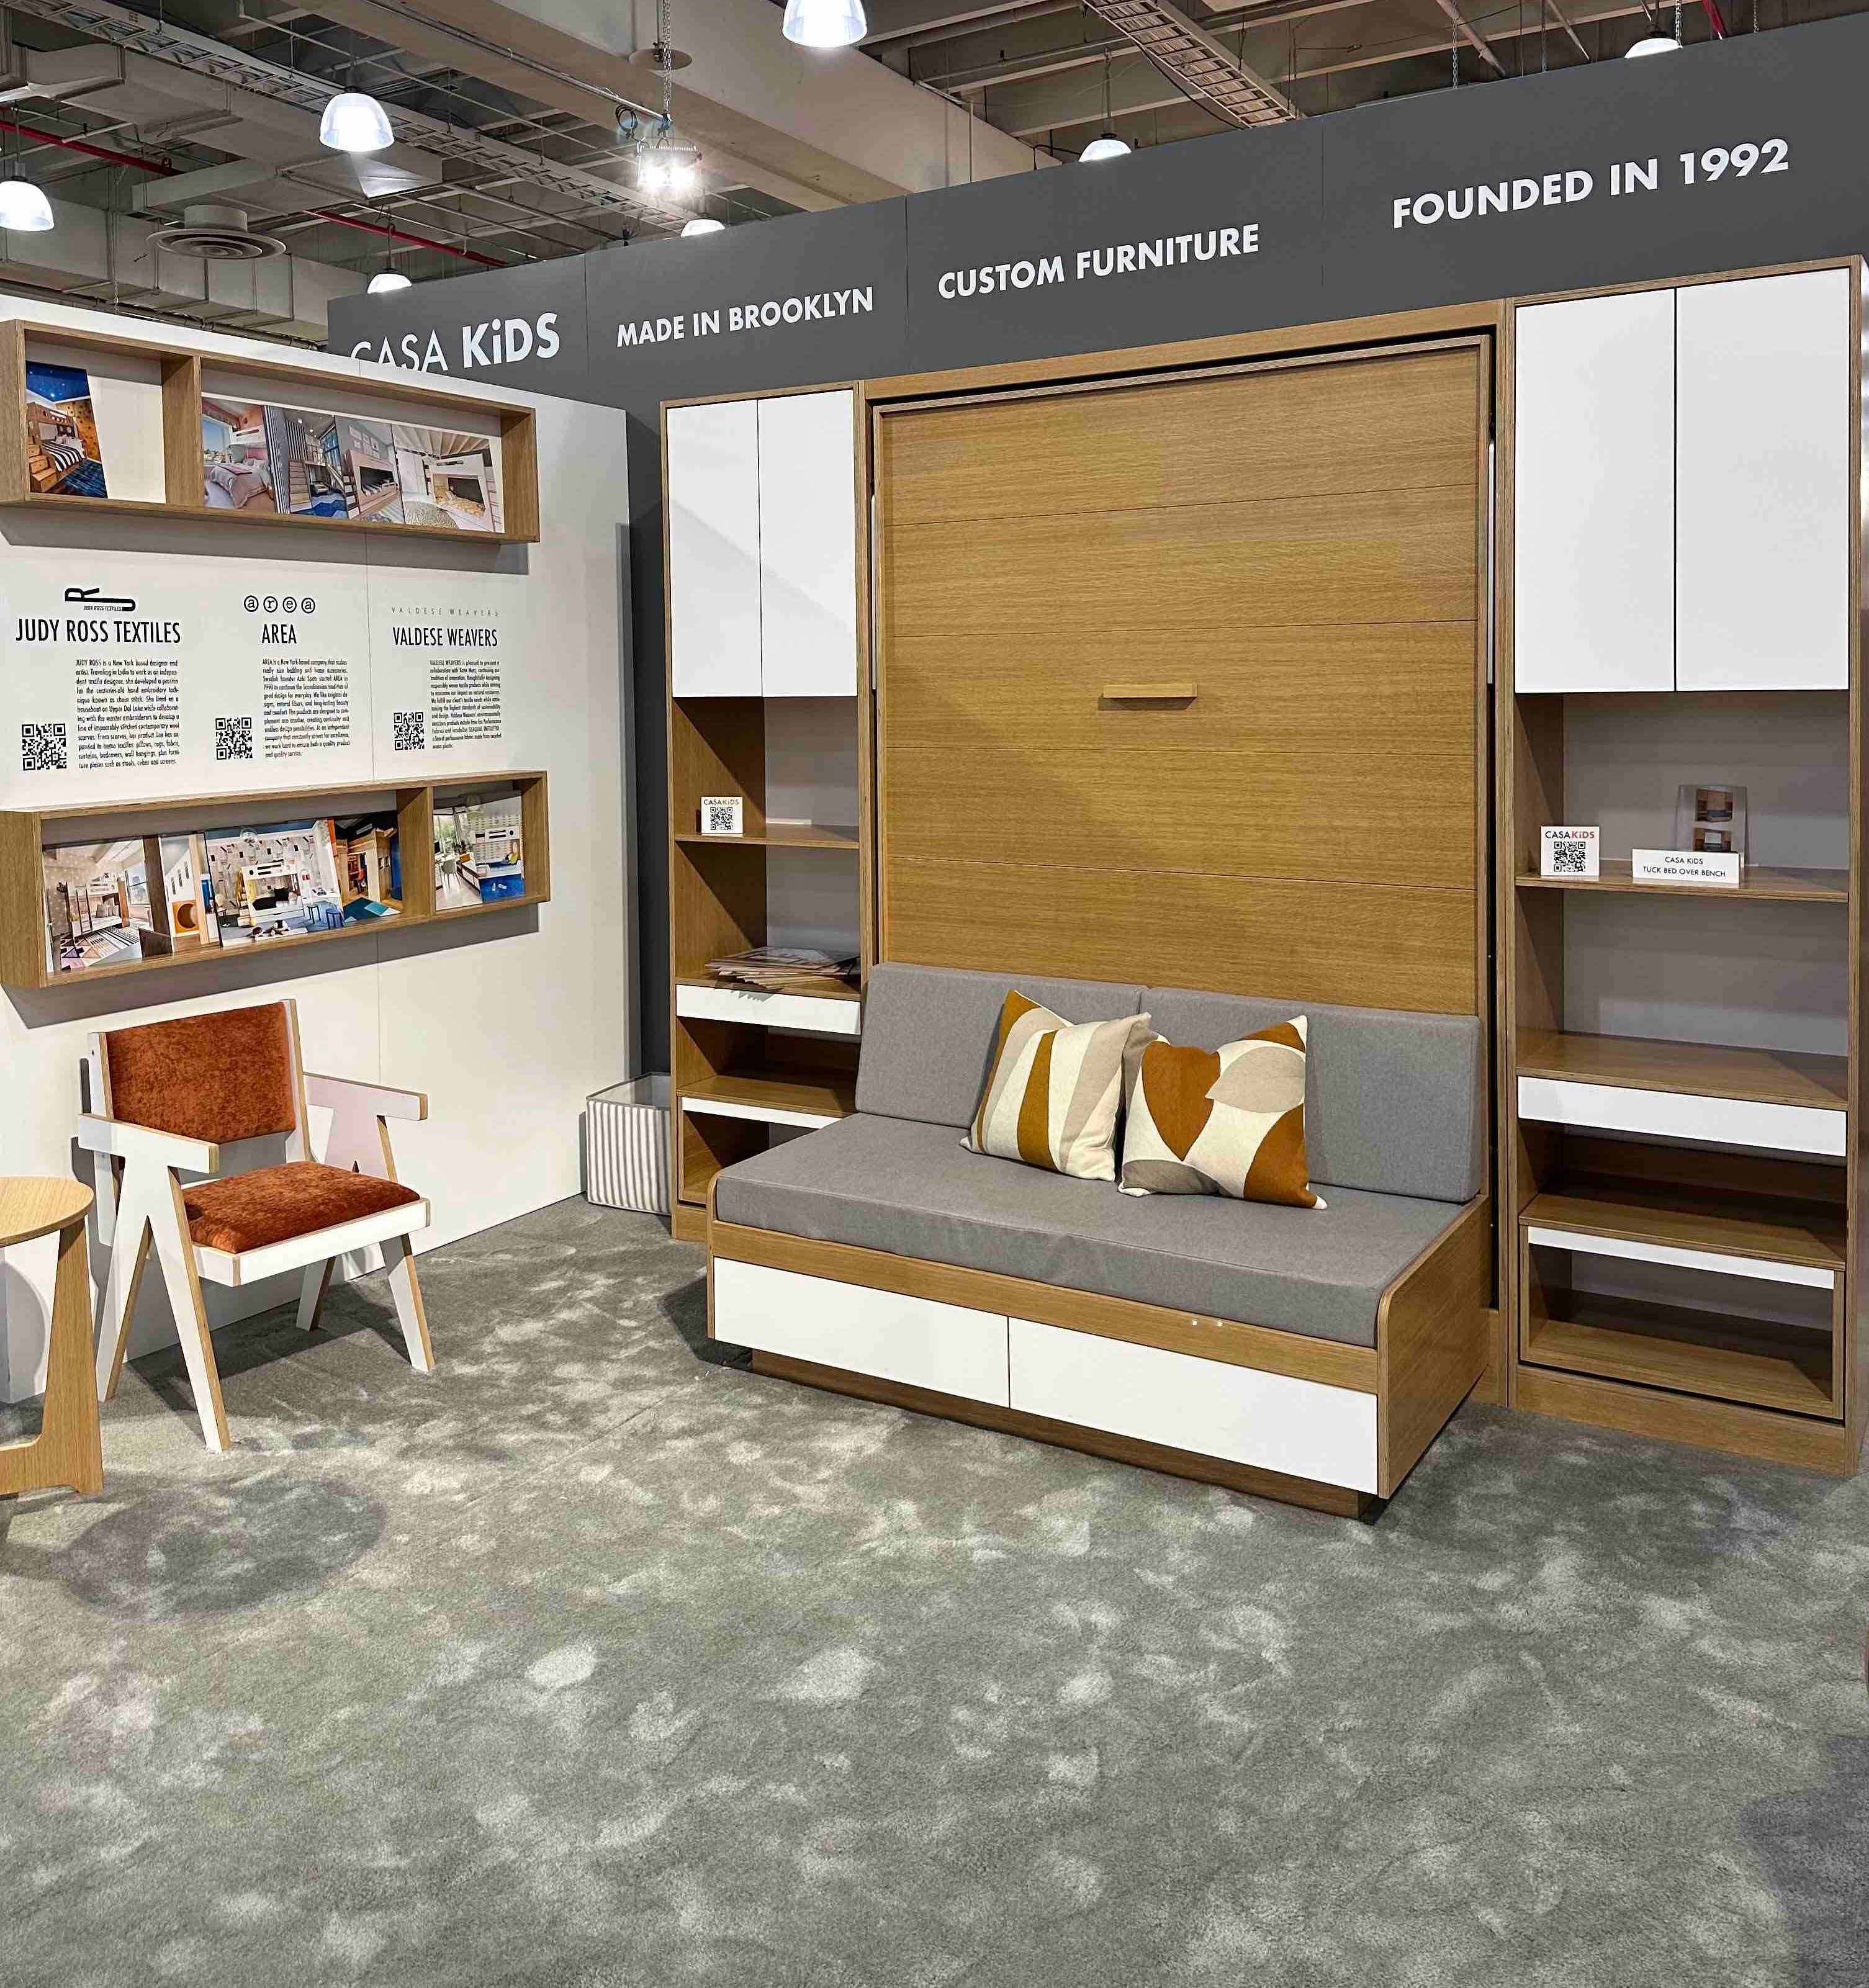 Casa Kids booth featuring a stylish murphy bed, sofa, chair, and wall-mounted shelving units at a fair.